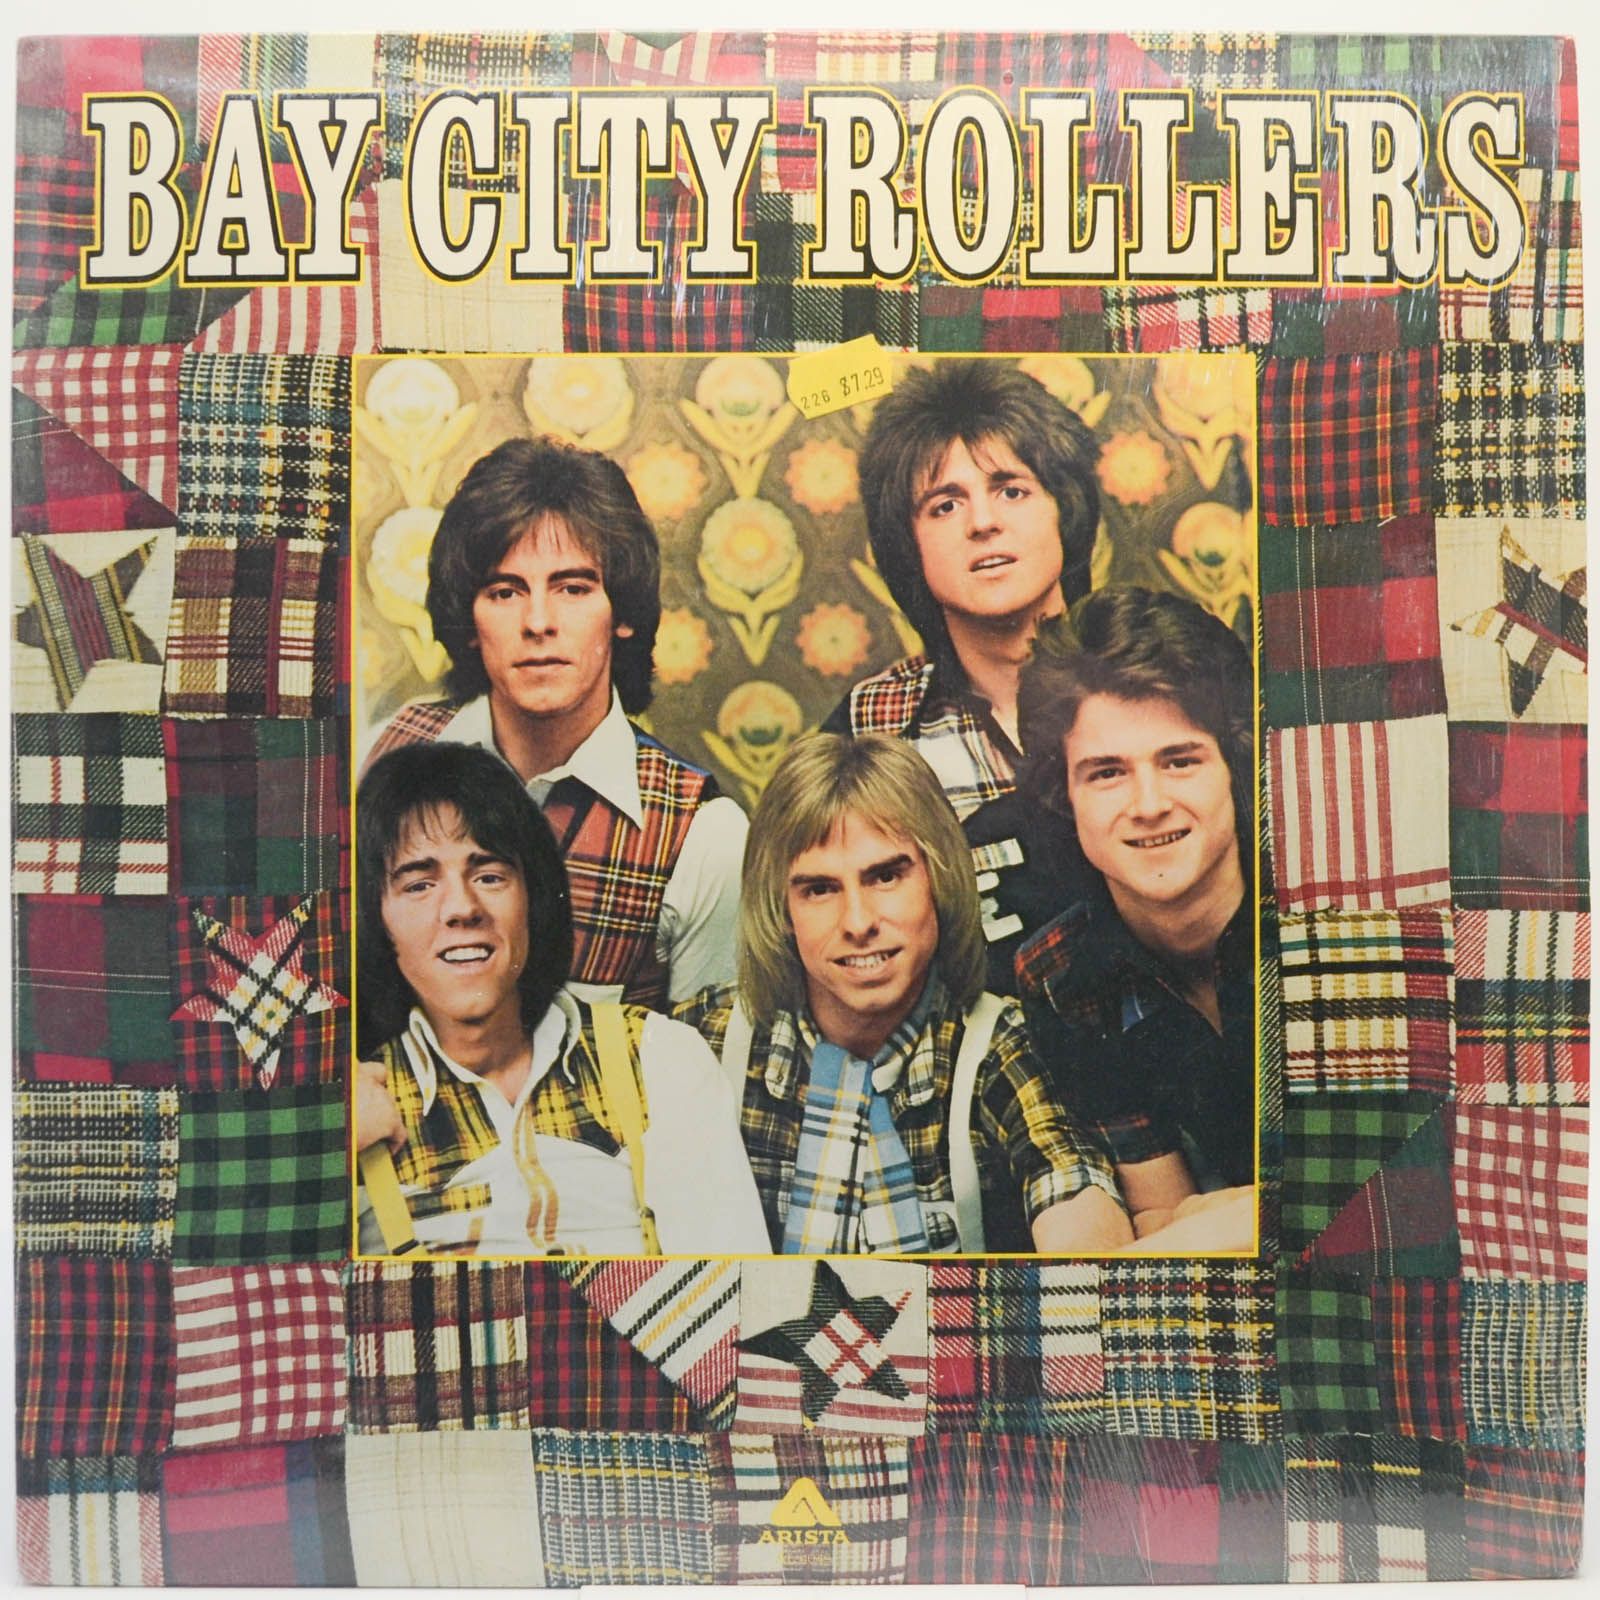 Bay City Rollers — Bay City Rollers, 1975